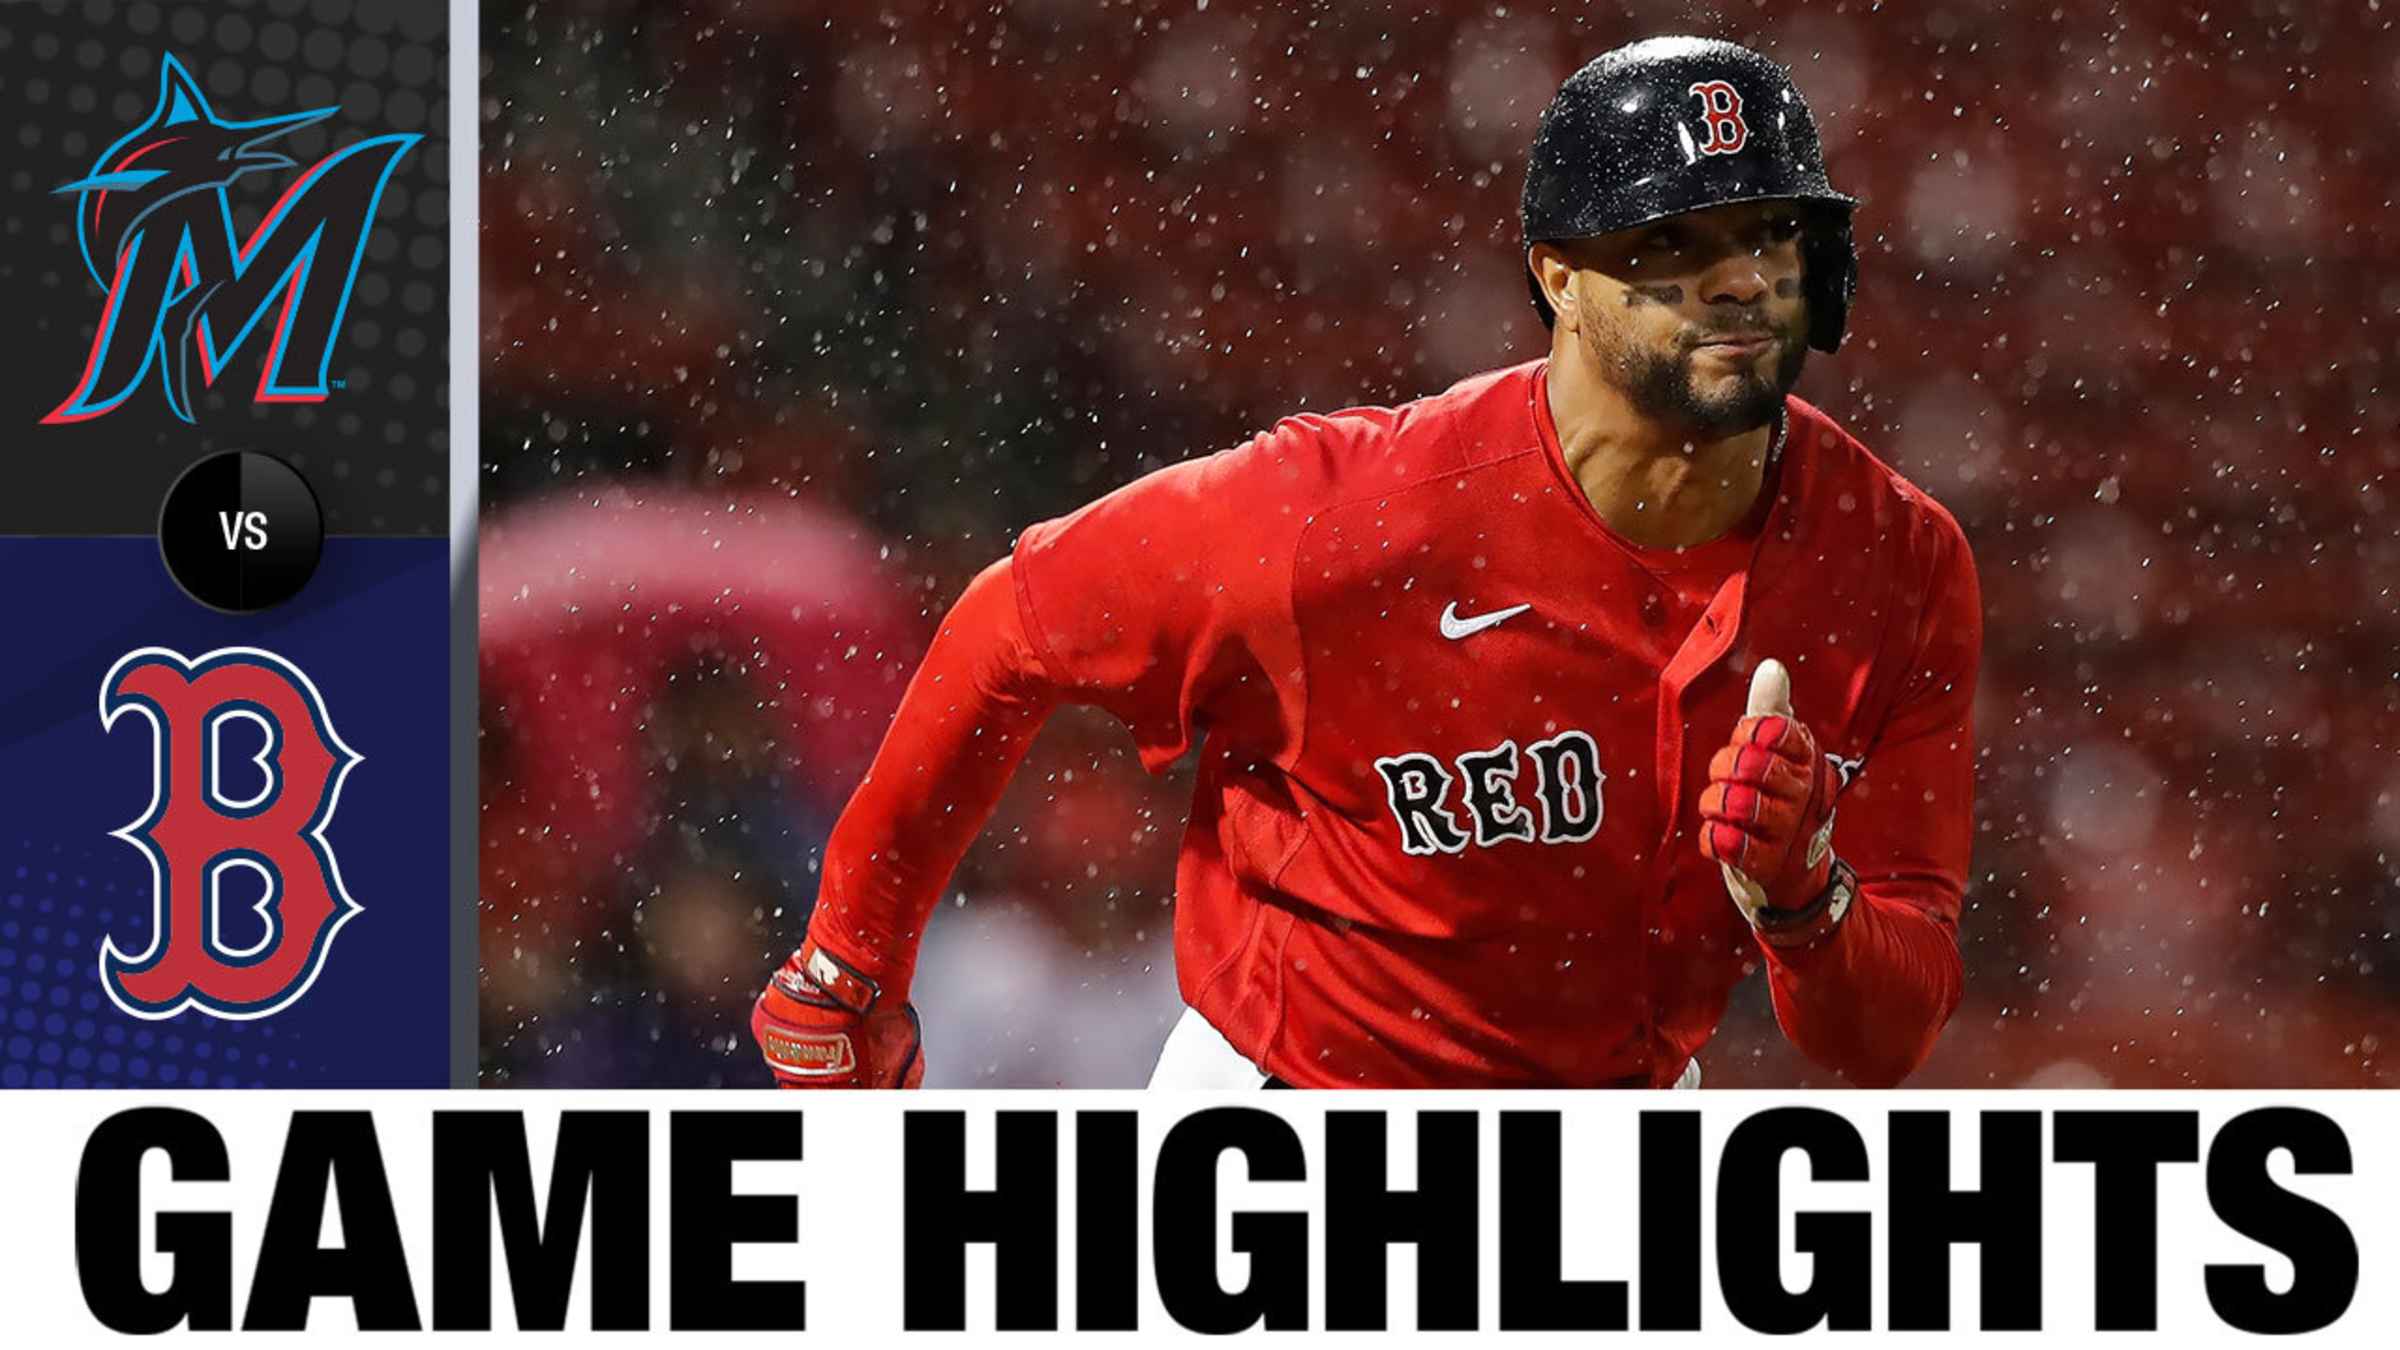 Verdugo, Red Sox beat Marlins in rain-shortened game